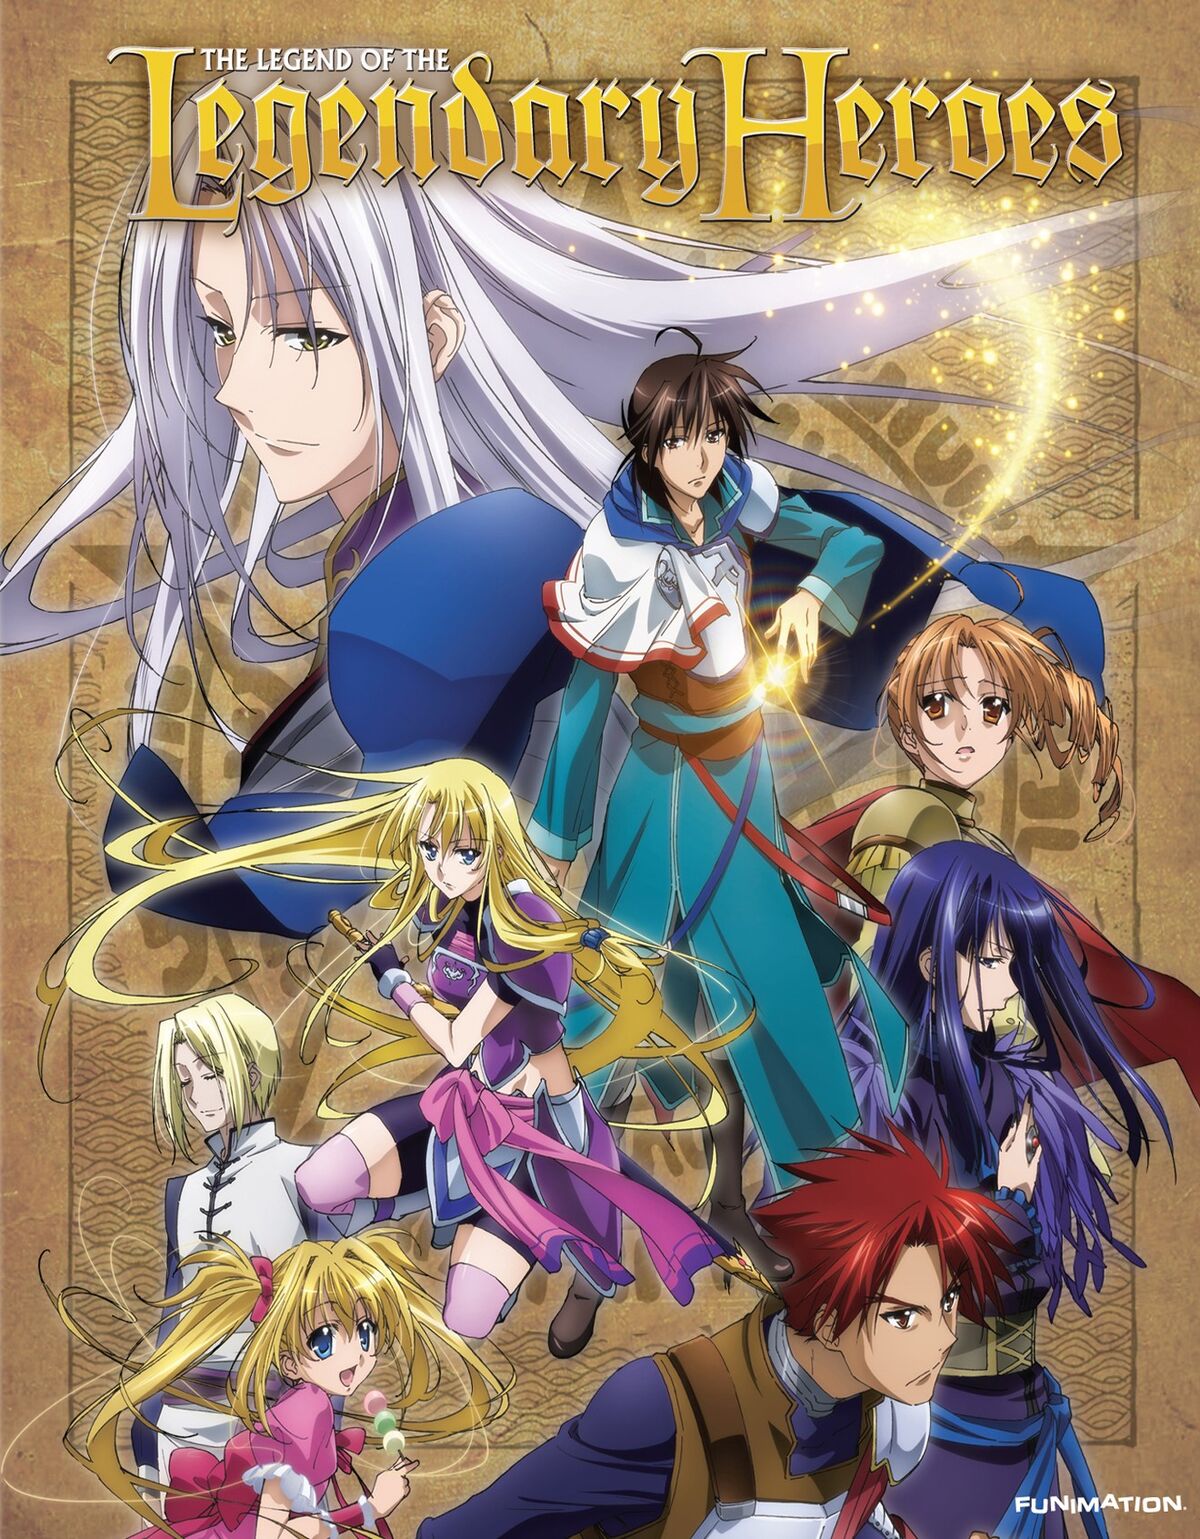 So who wants a continuation of this? (Legend of the Legendary Heroes) :  r/anime